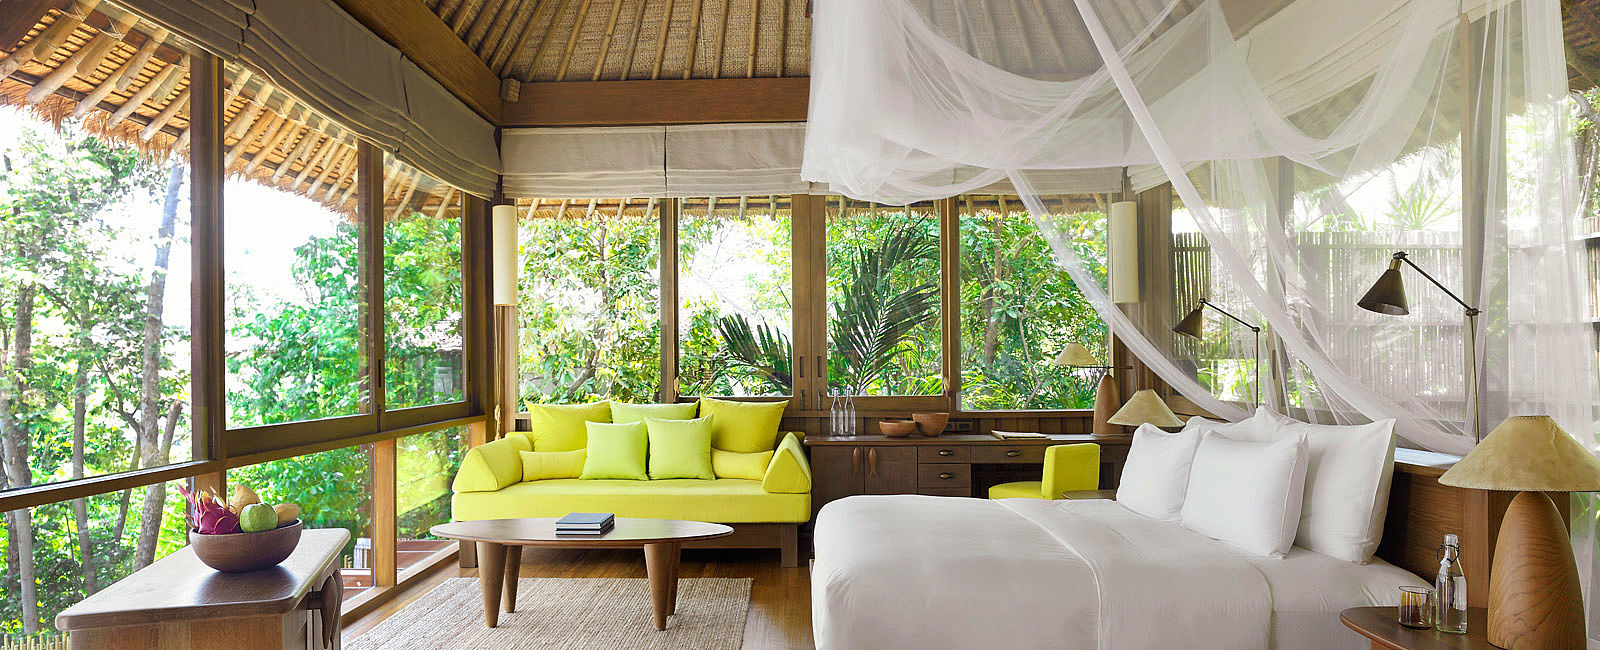 HOTEL ANGEBOTE
 Six Senses Samui: -25% Extended Stay Offer  
